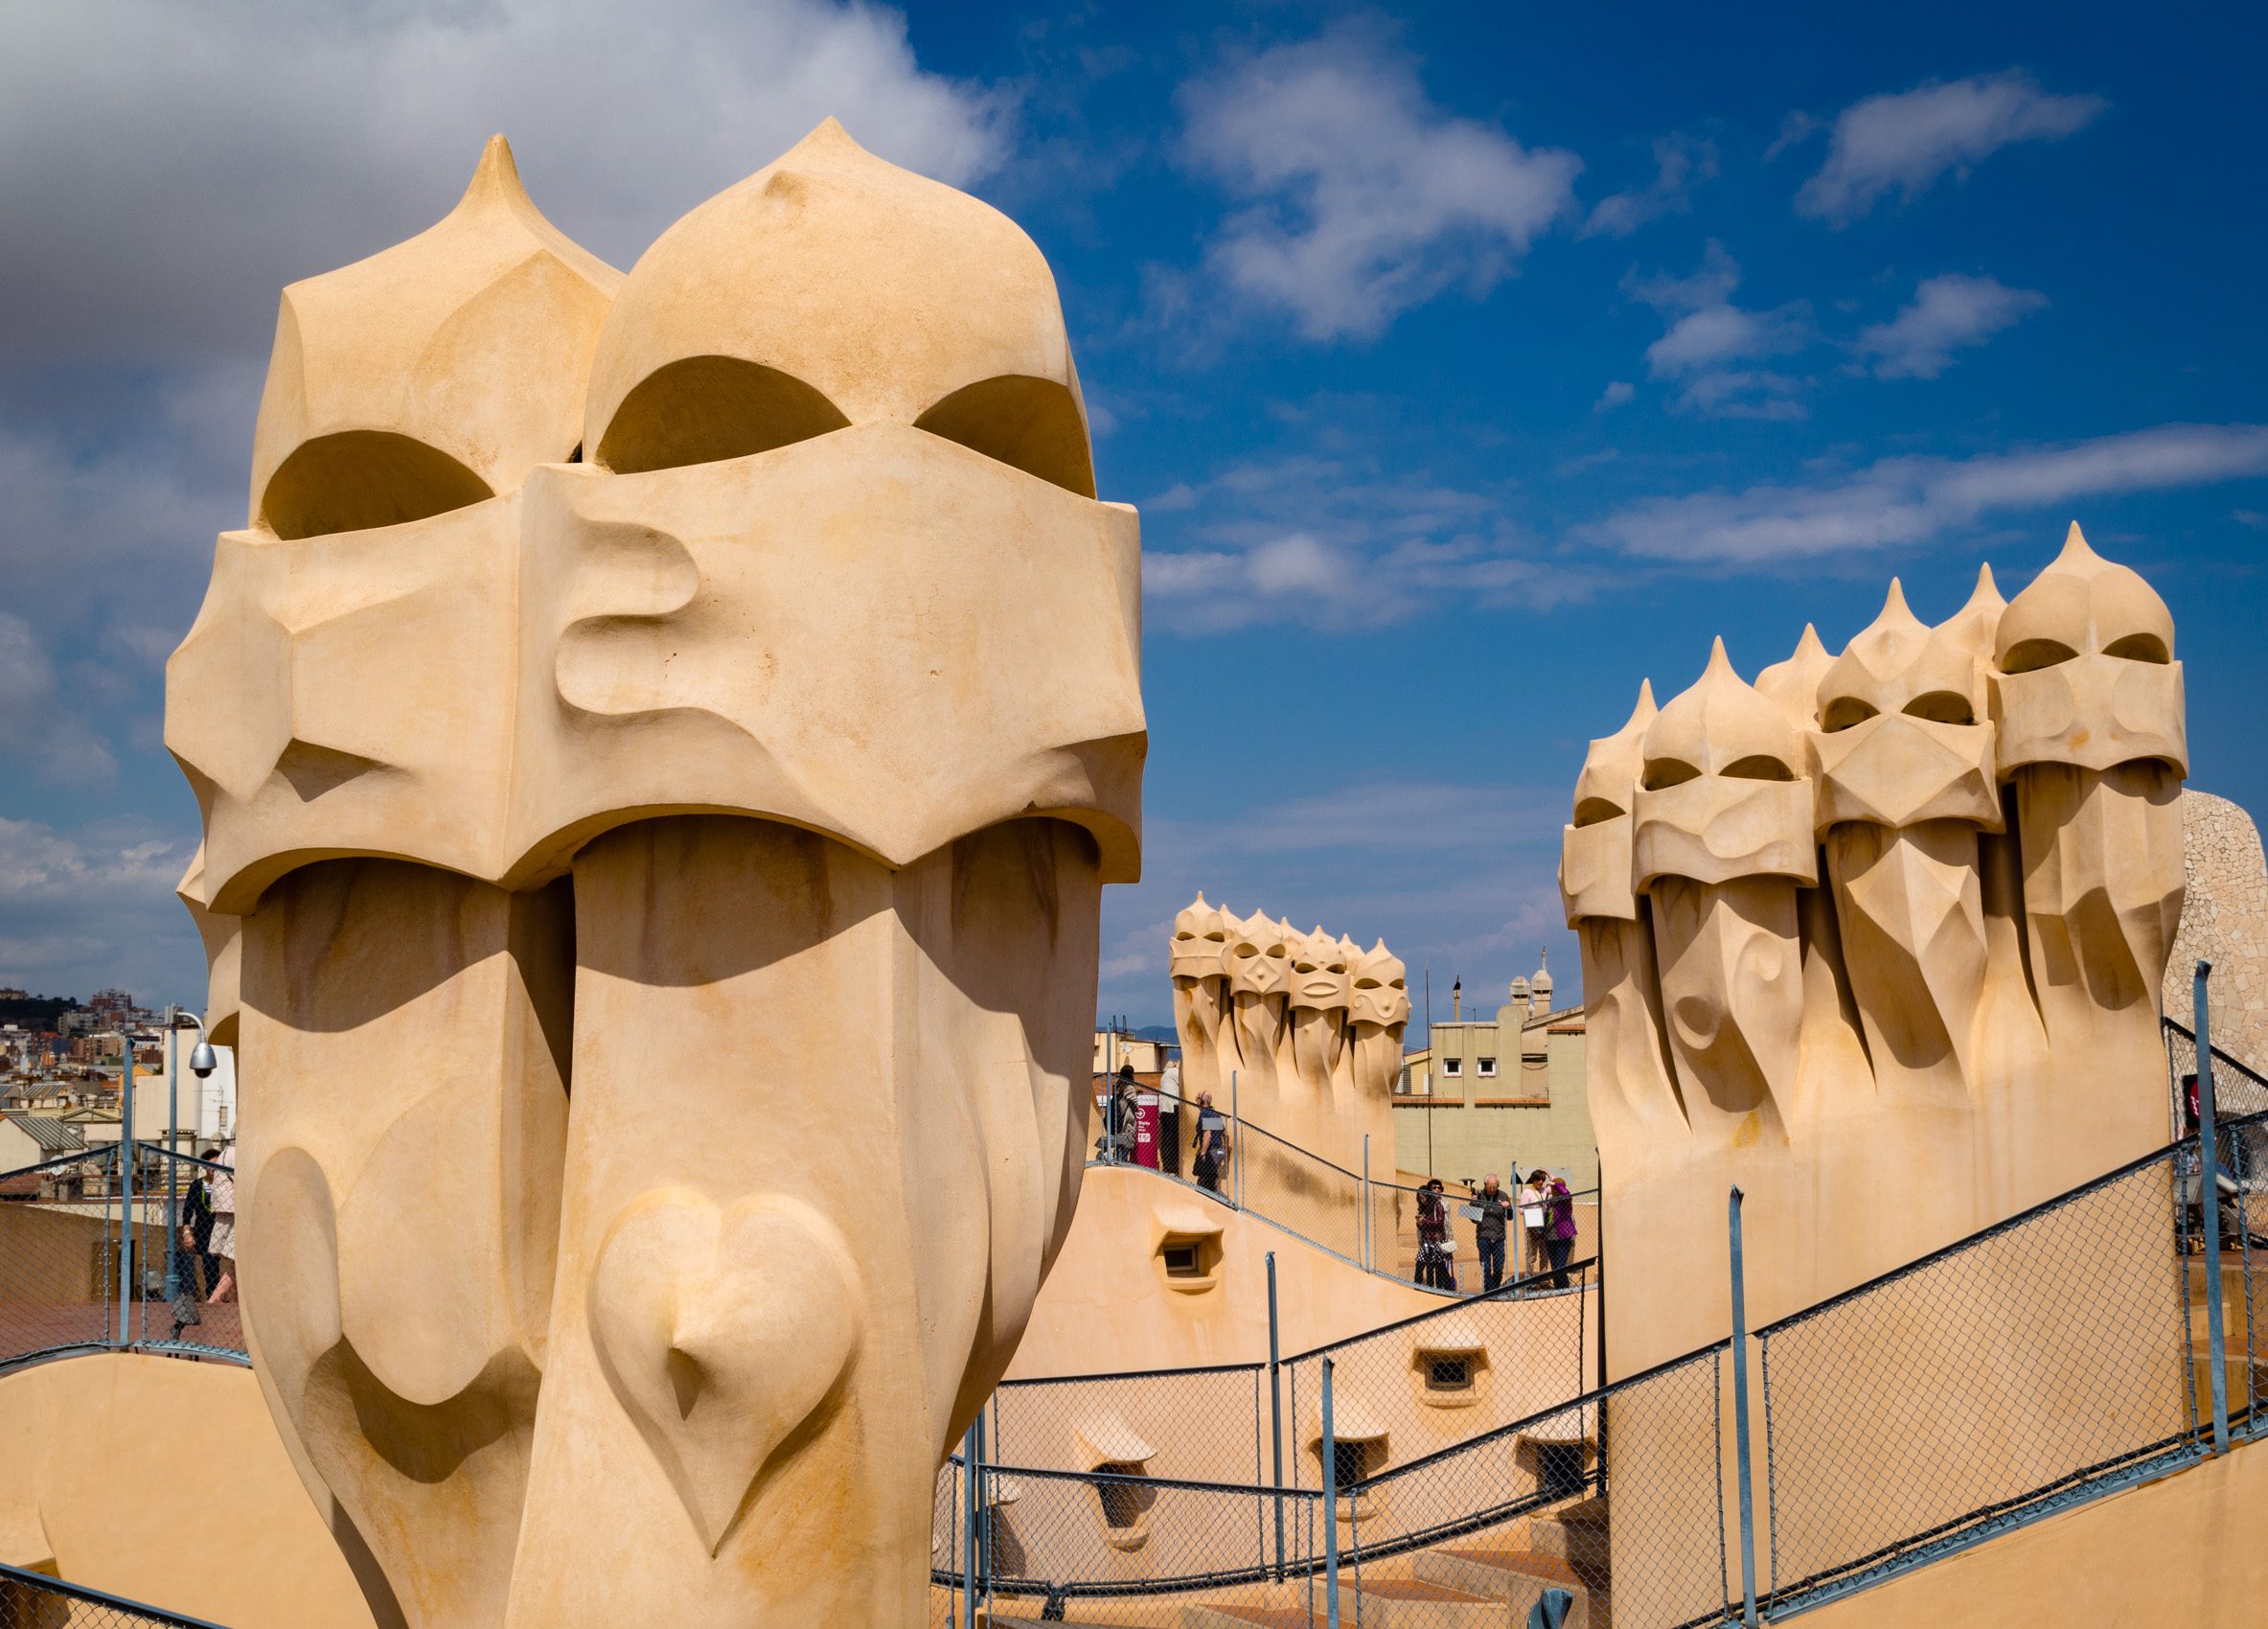 Three groups of chimneys on the roof of Casa Mila, Barcelona, Spain. BC002